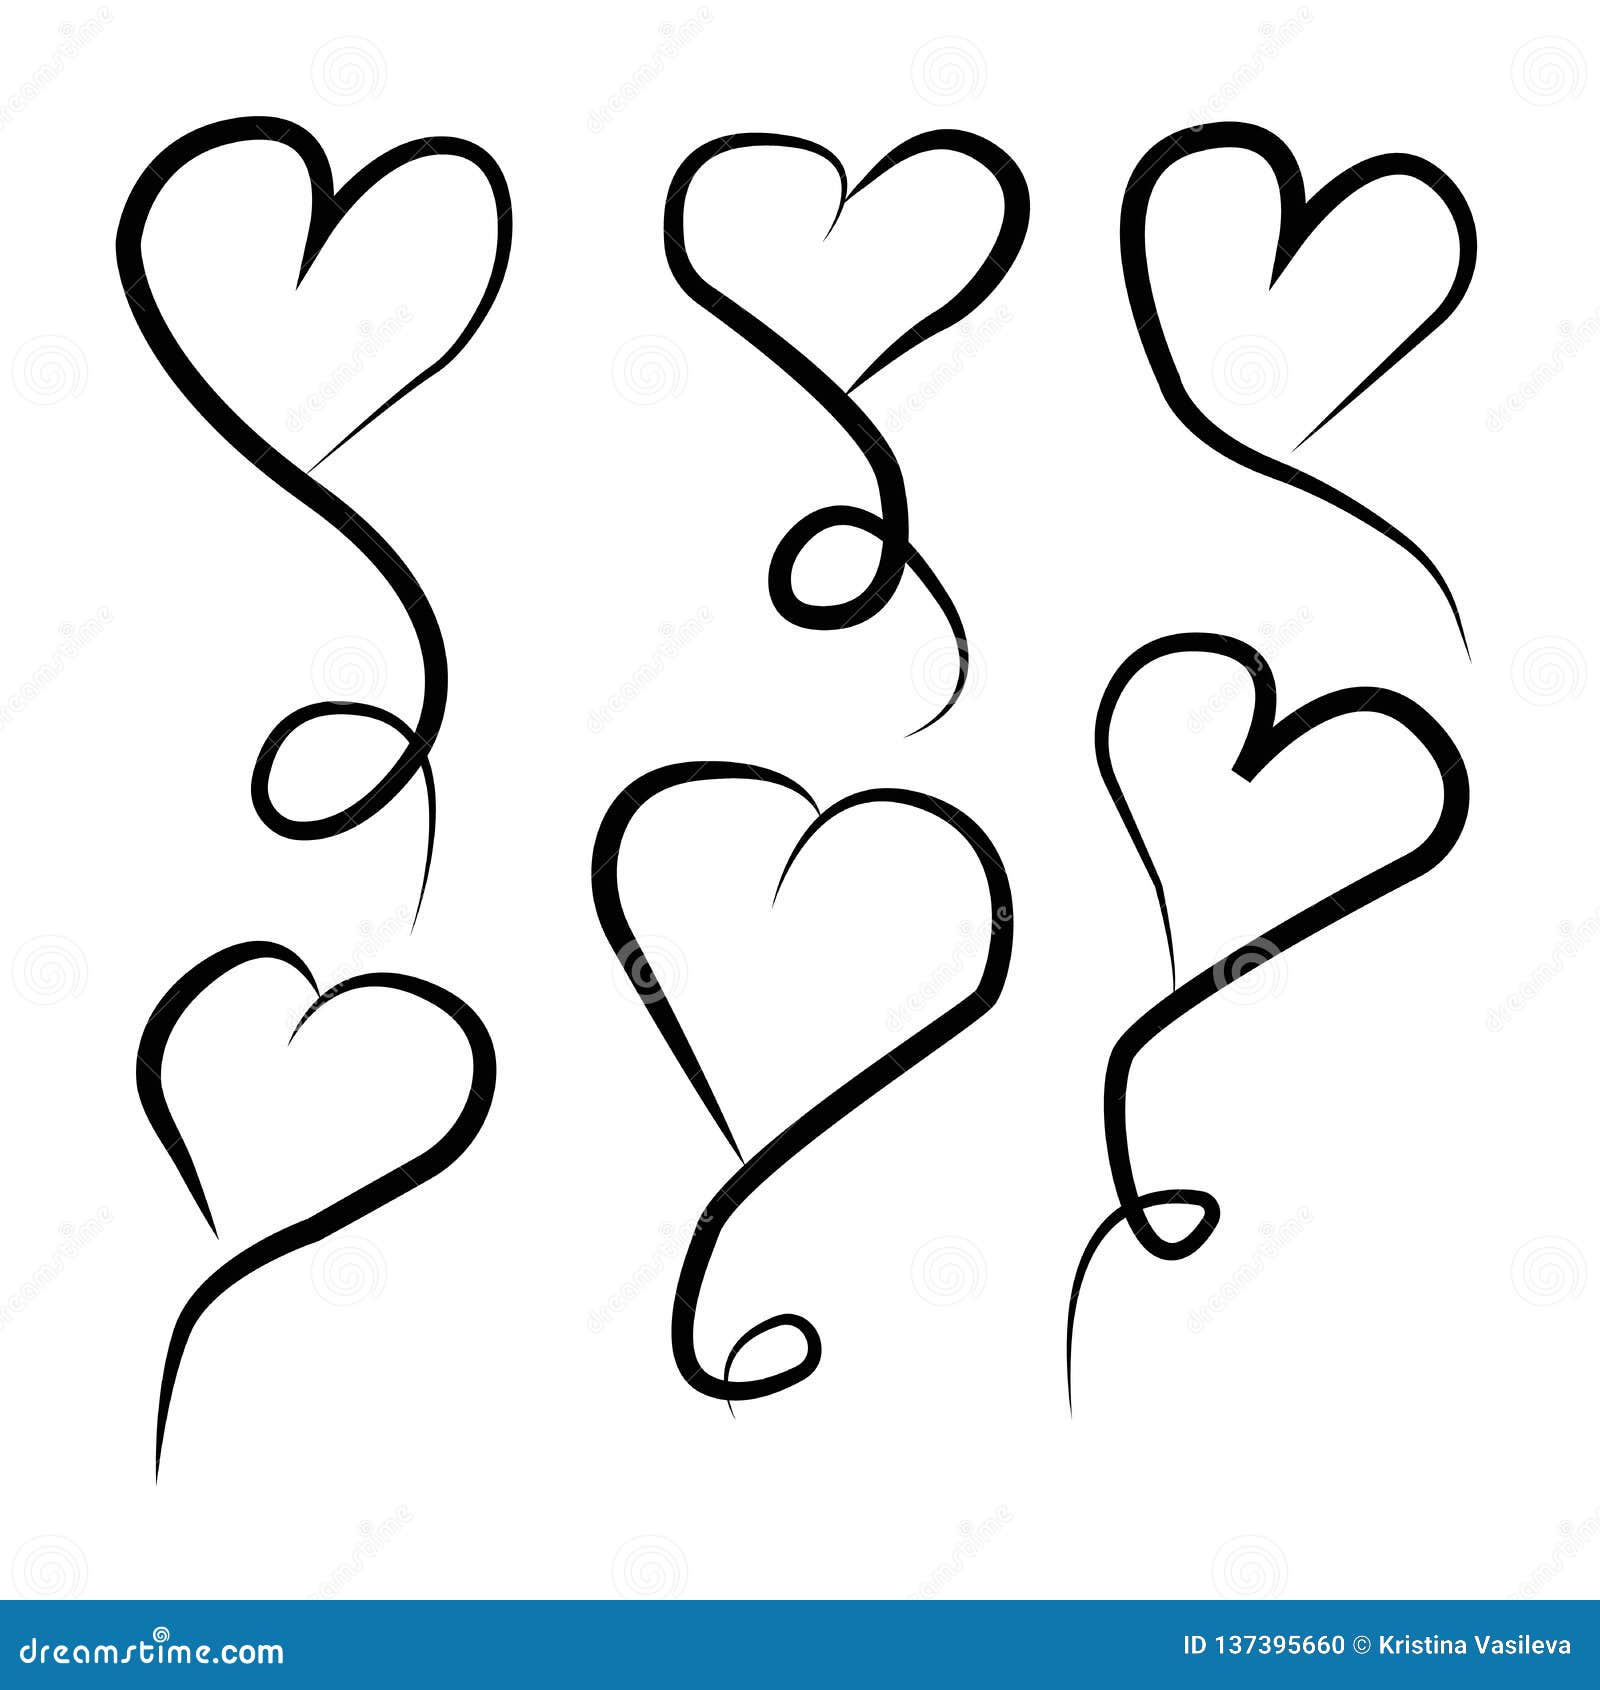 Set Of Outline Hand Drawn Heart Iconvector Heart Collection